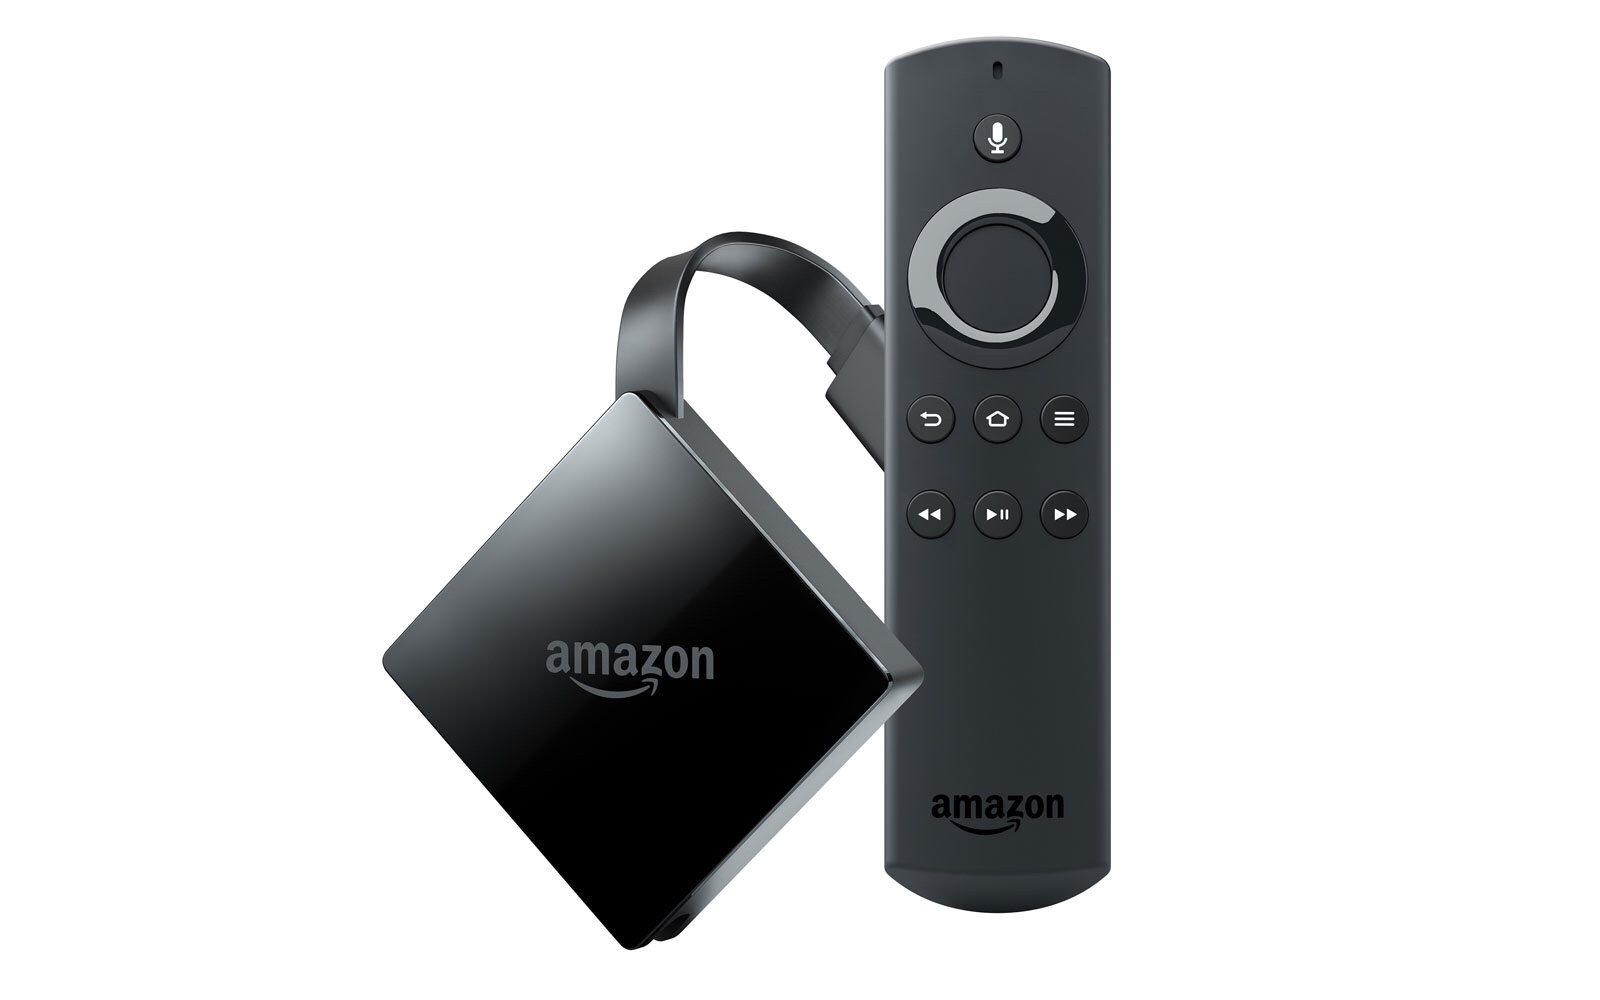 Amazon has added single sign-on functionality across select Fire TV apps